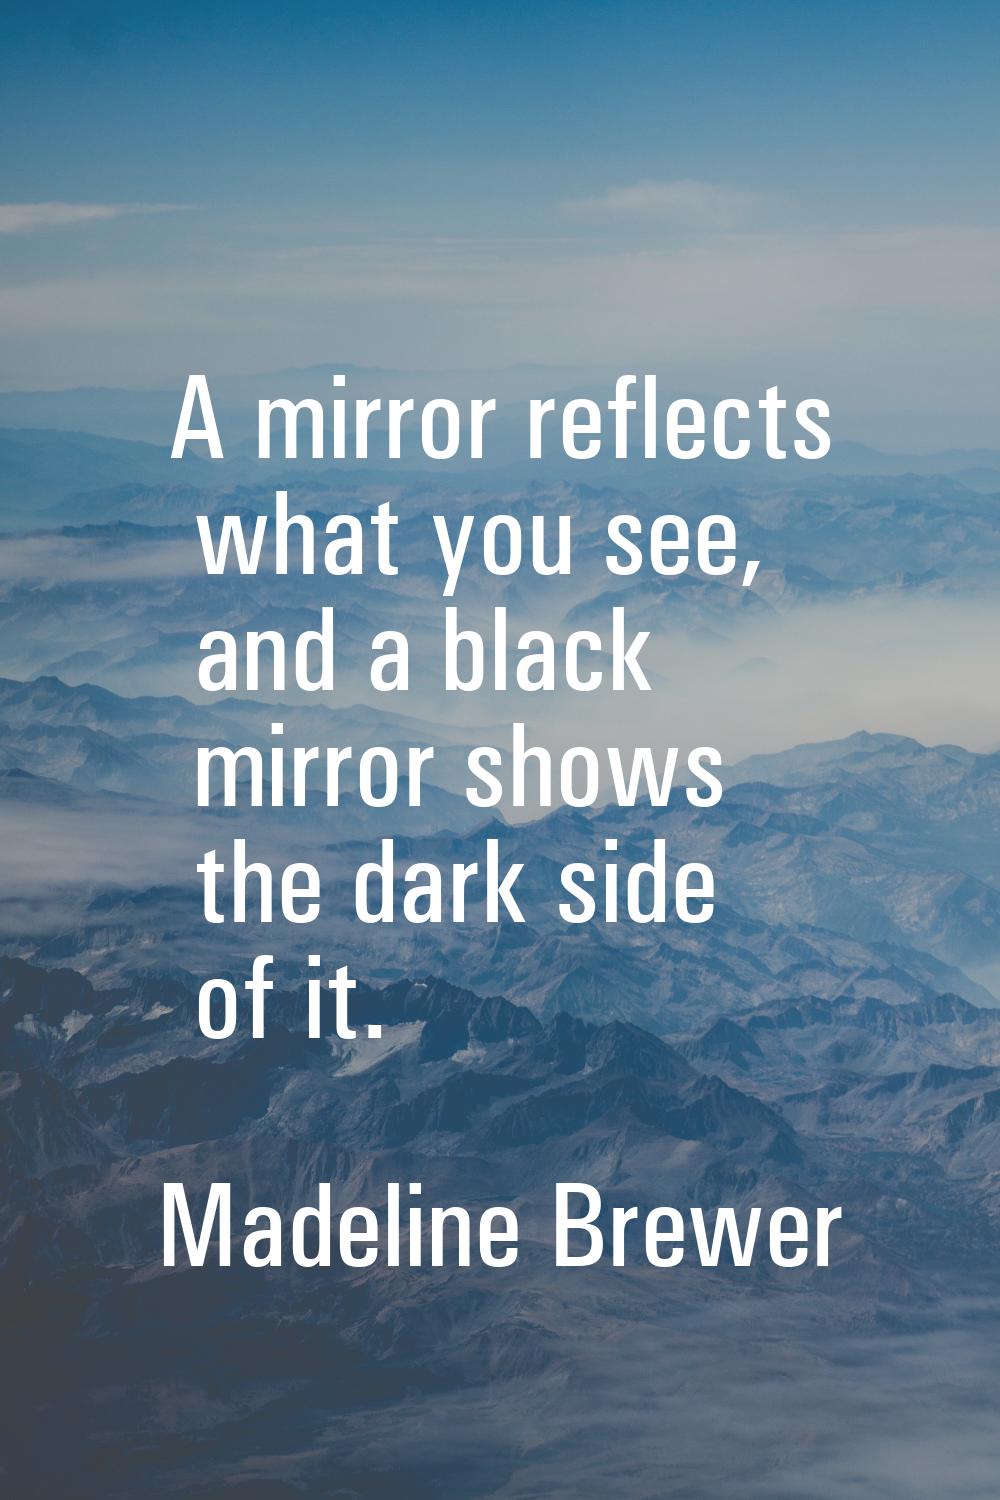 A mirror reflects what you see, and a black mirror shows the dark side of it.